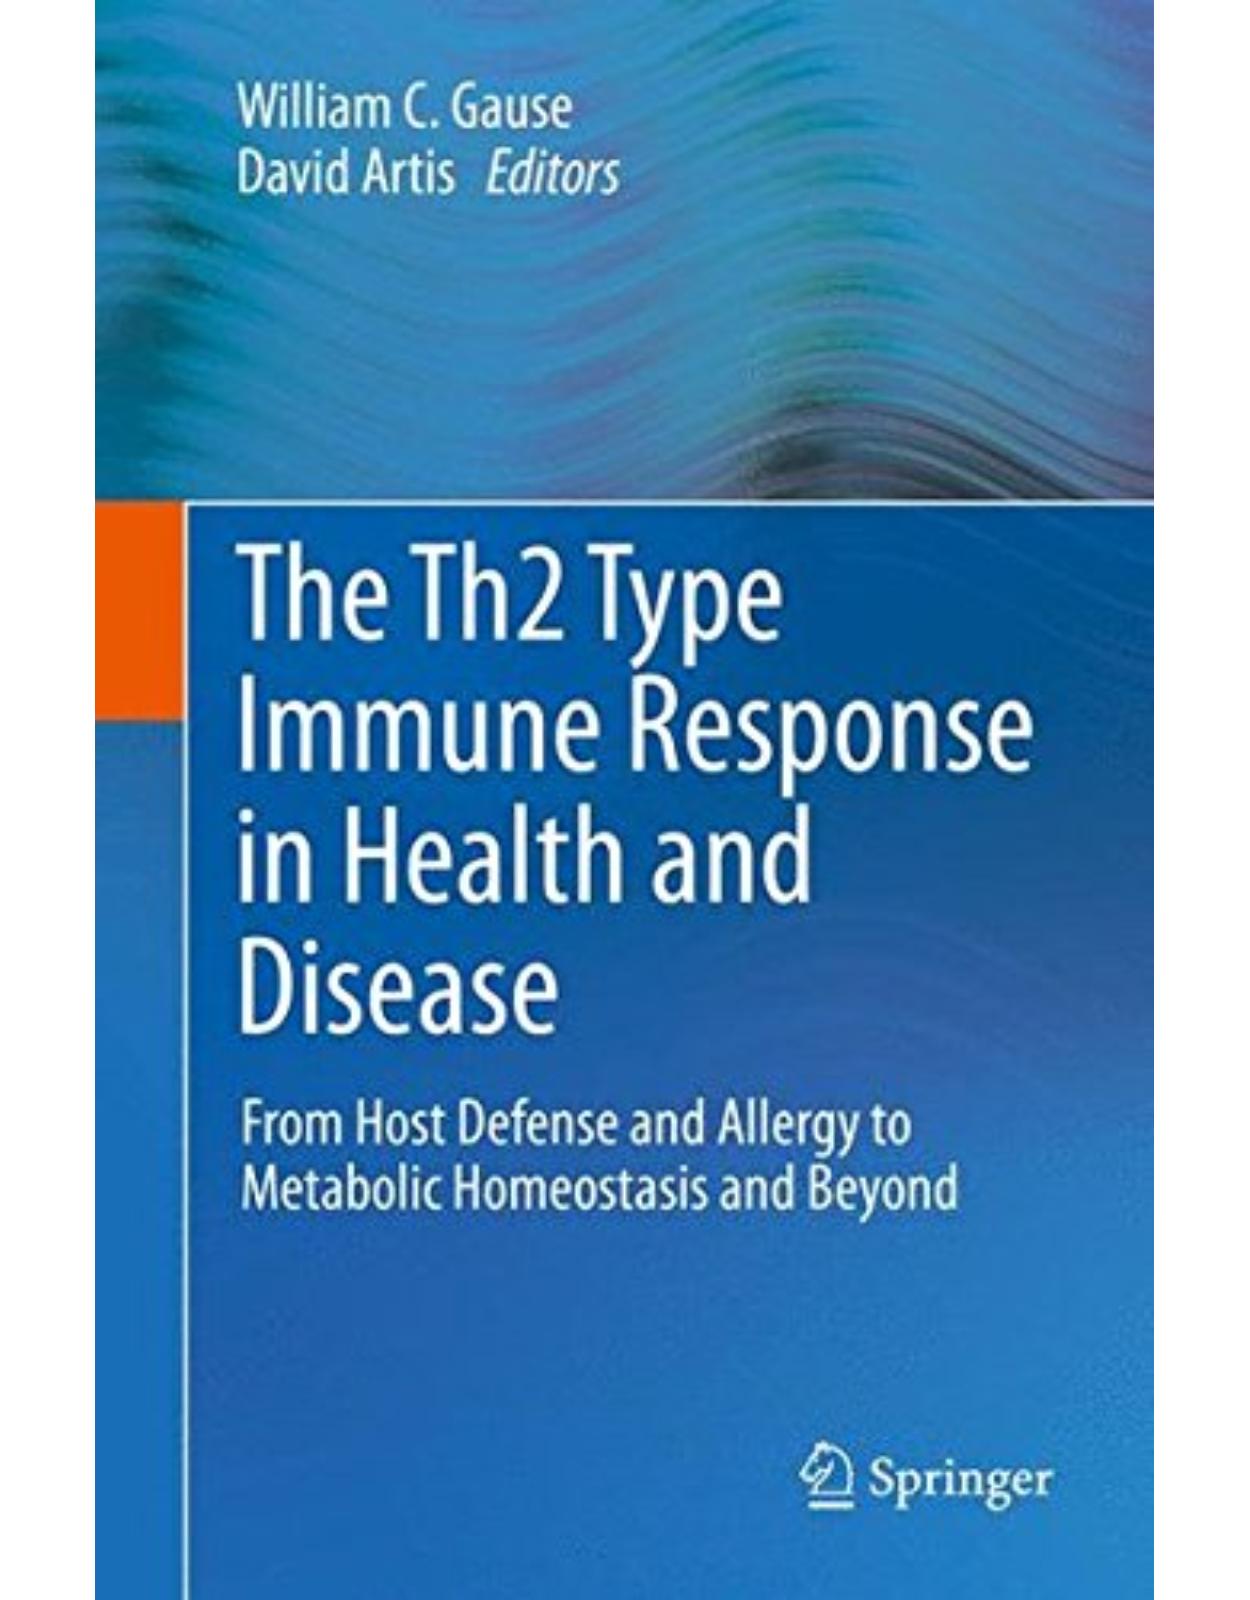 The Th2 Type Immune Response in Health and Disease: From Host Defense and Allergy to Metabolic Homeostasis and Beyond